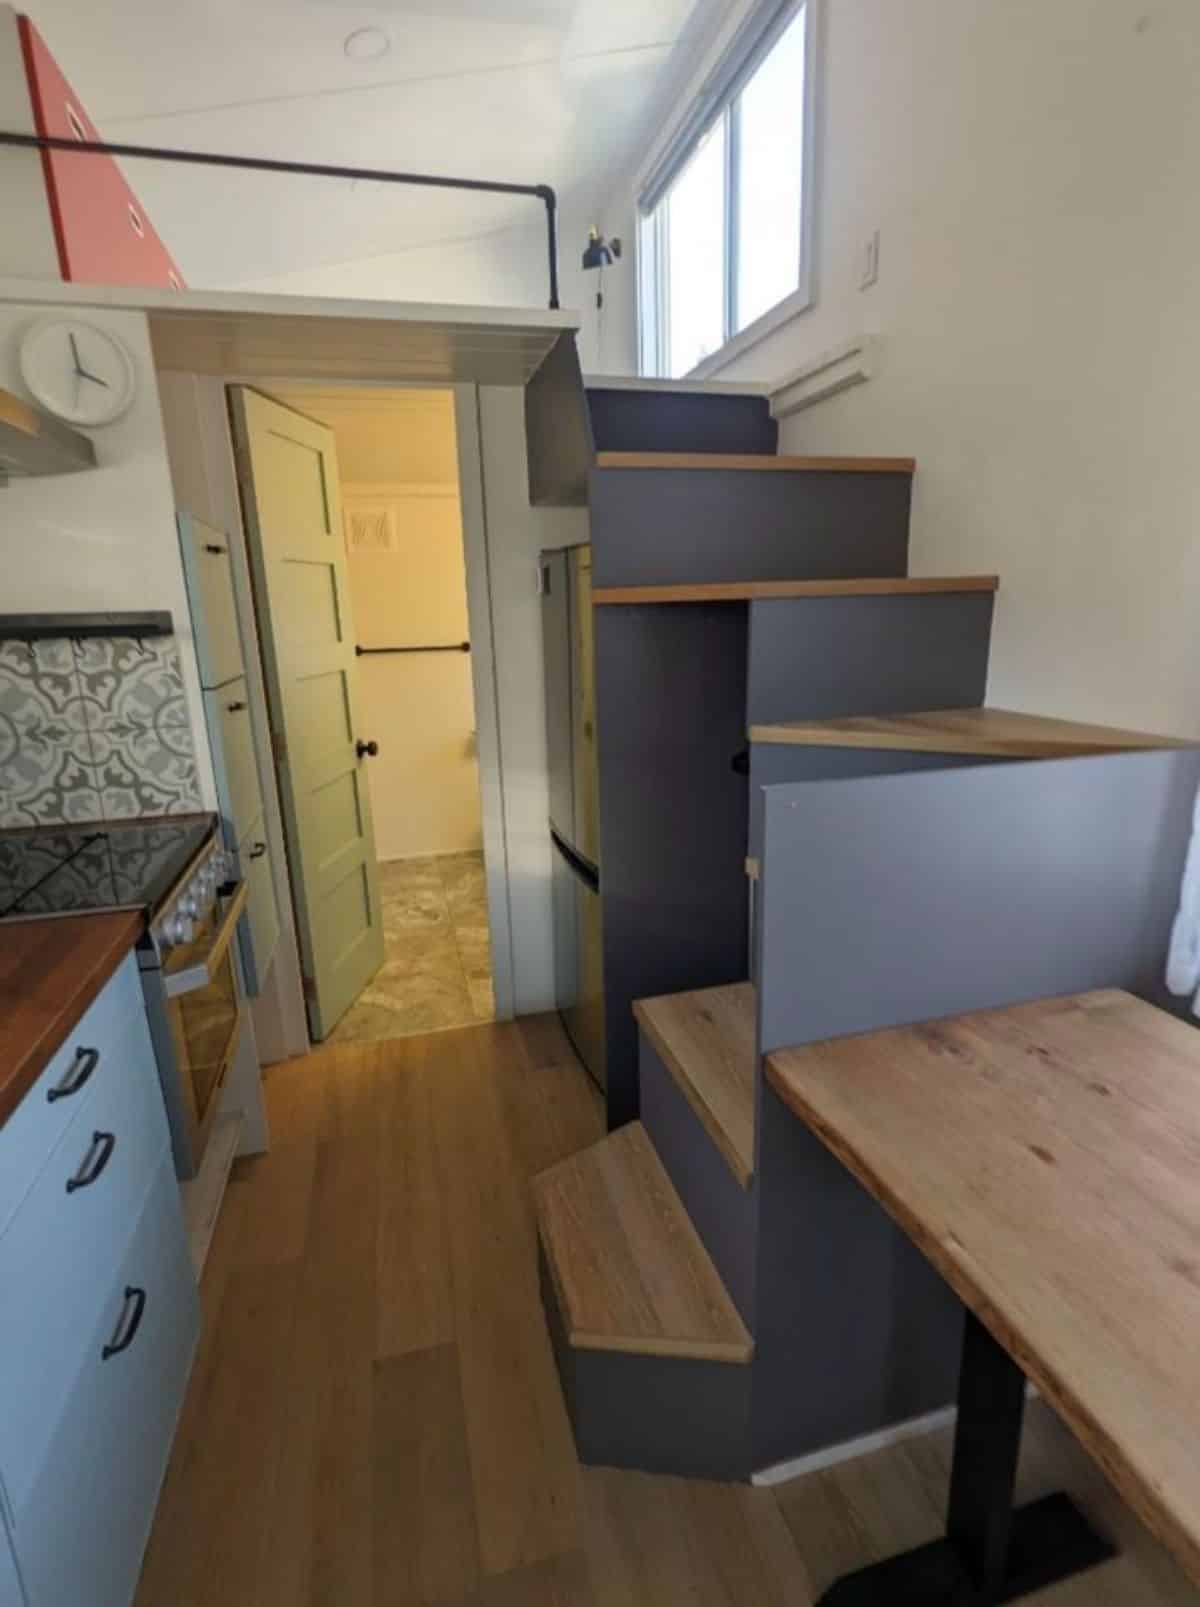 multi purpose stairs has refrigerator underneath and it leads to the main loft